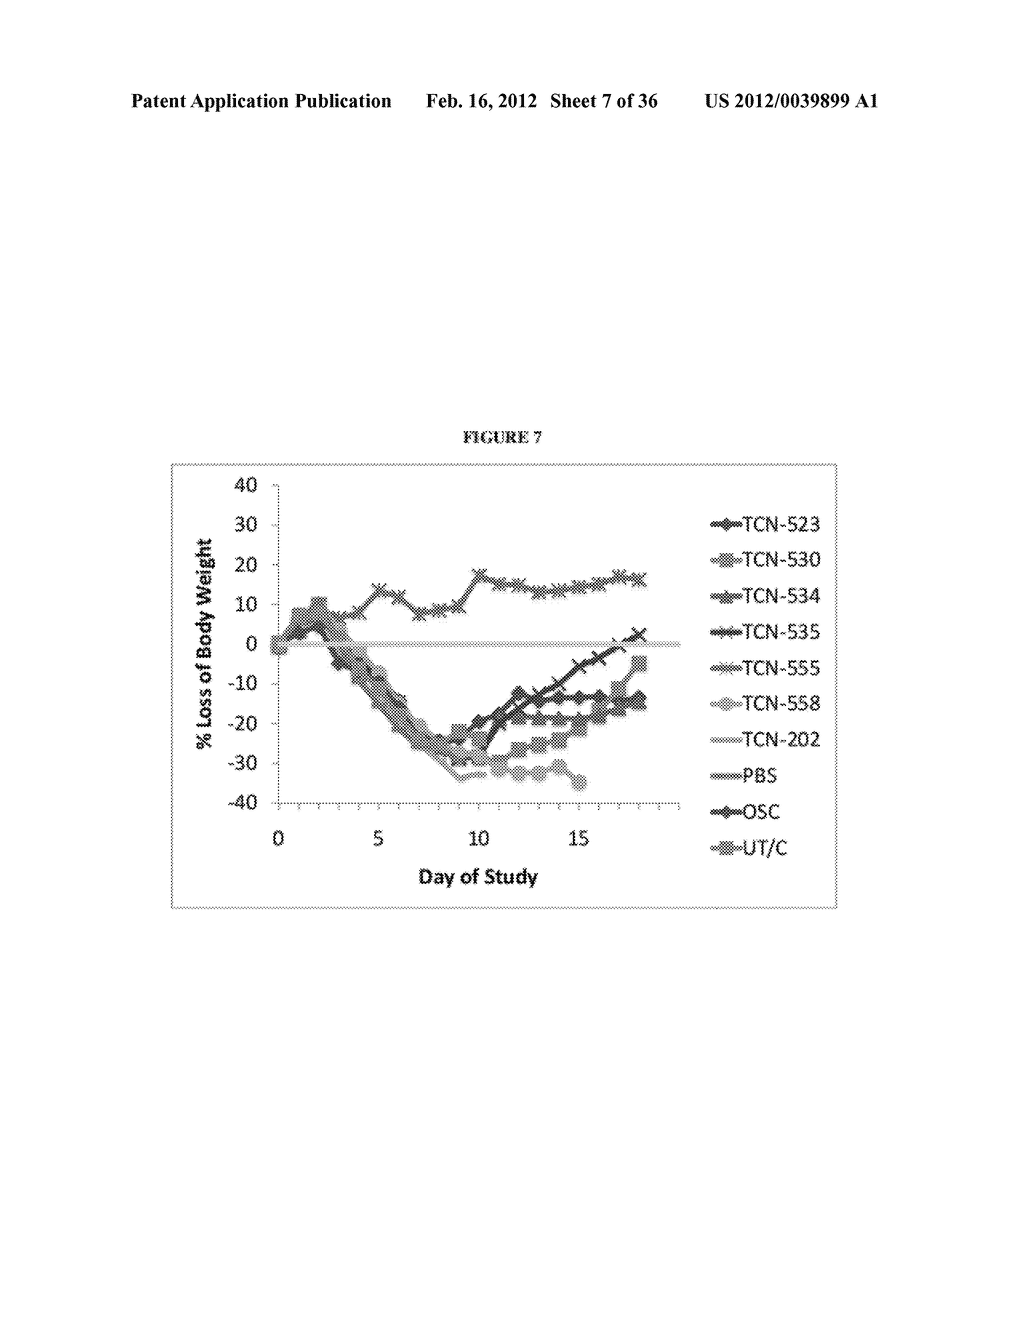 Anti-Hemagglutinin Antibody Compositions And Methods Of Use Thereof - diagram, schematic, and image 08